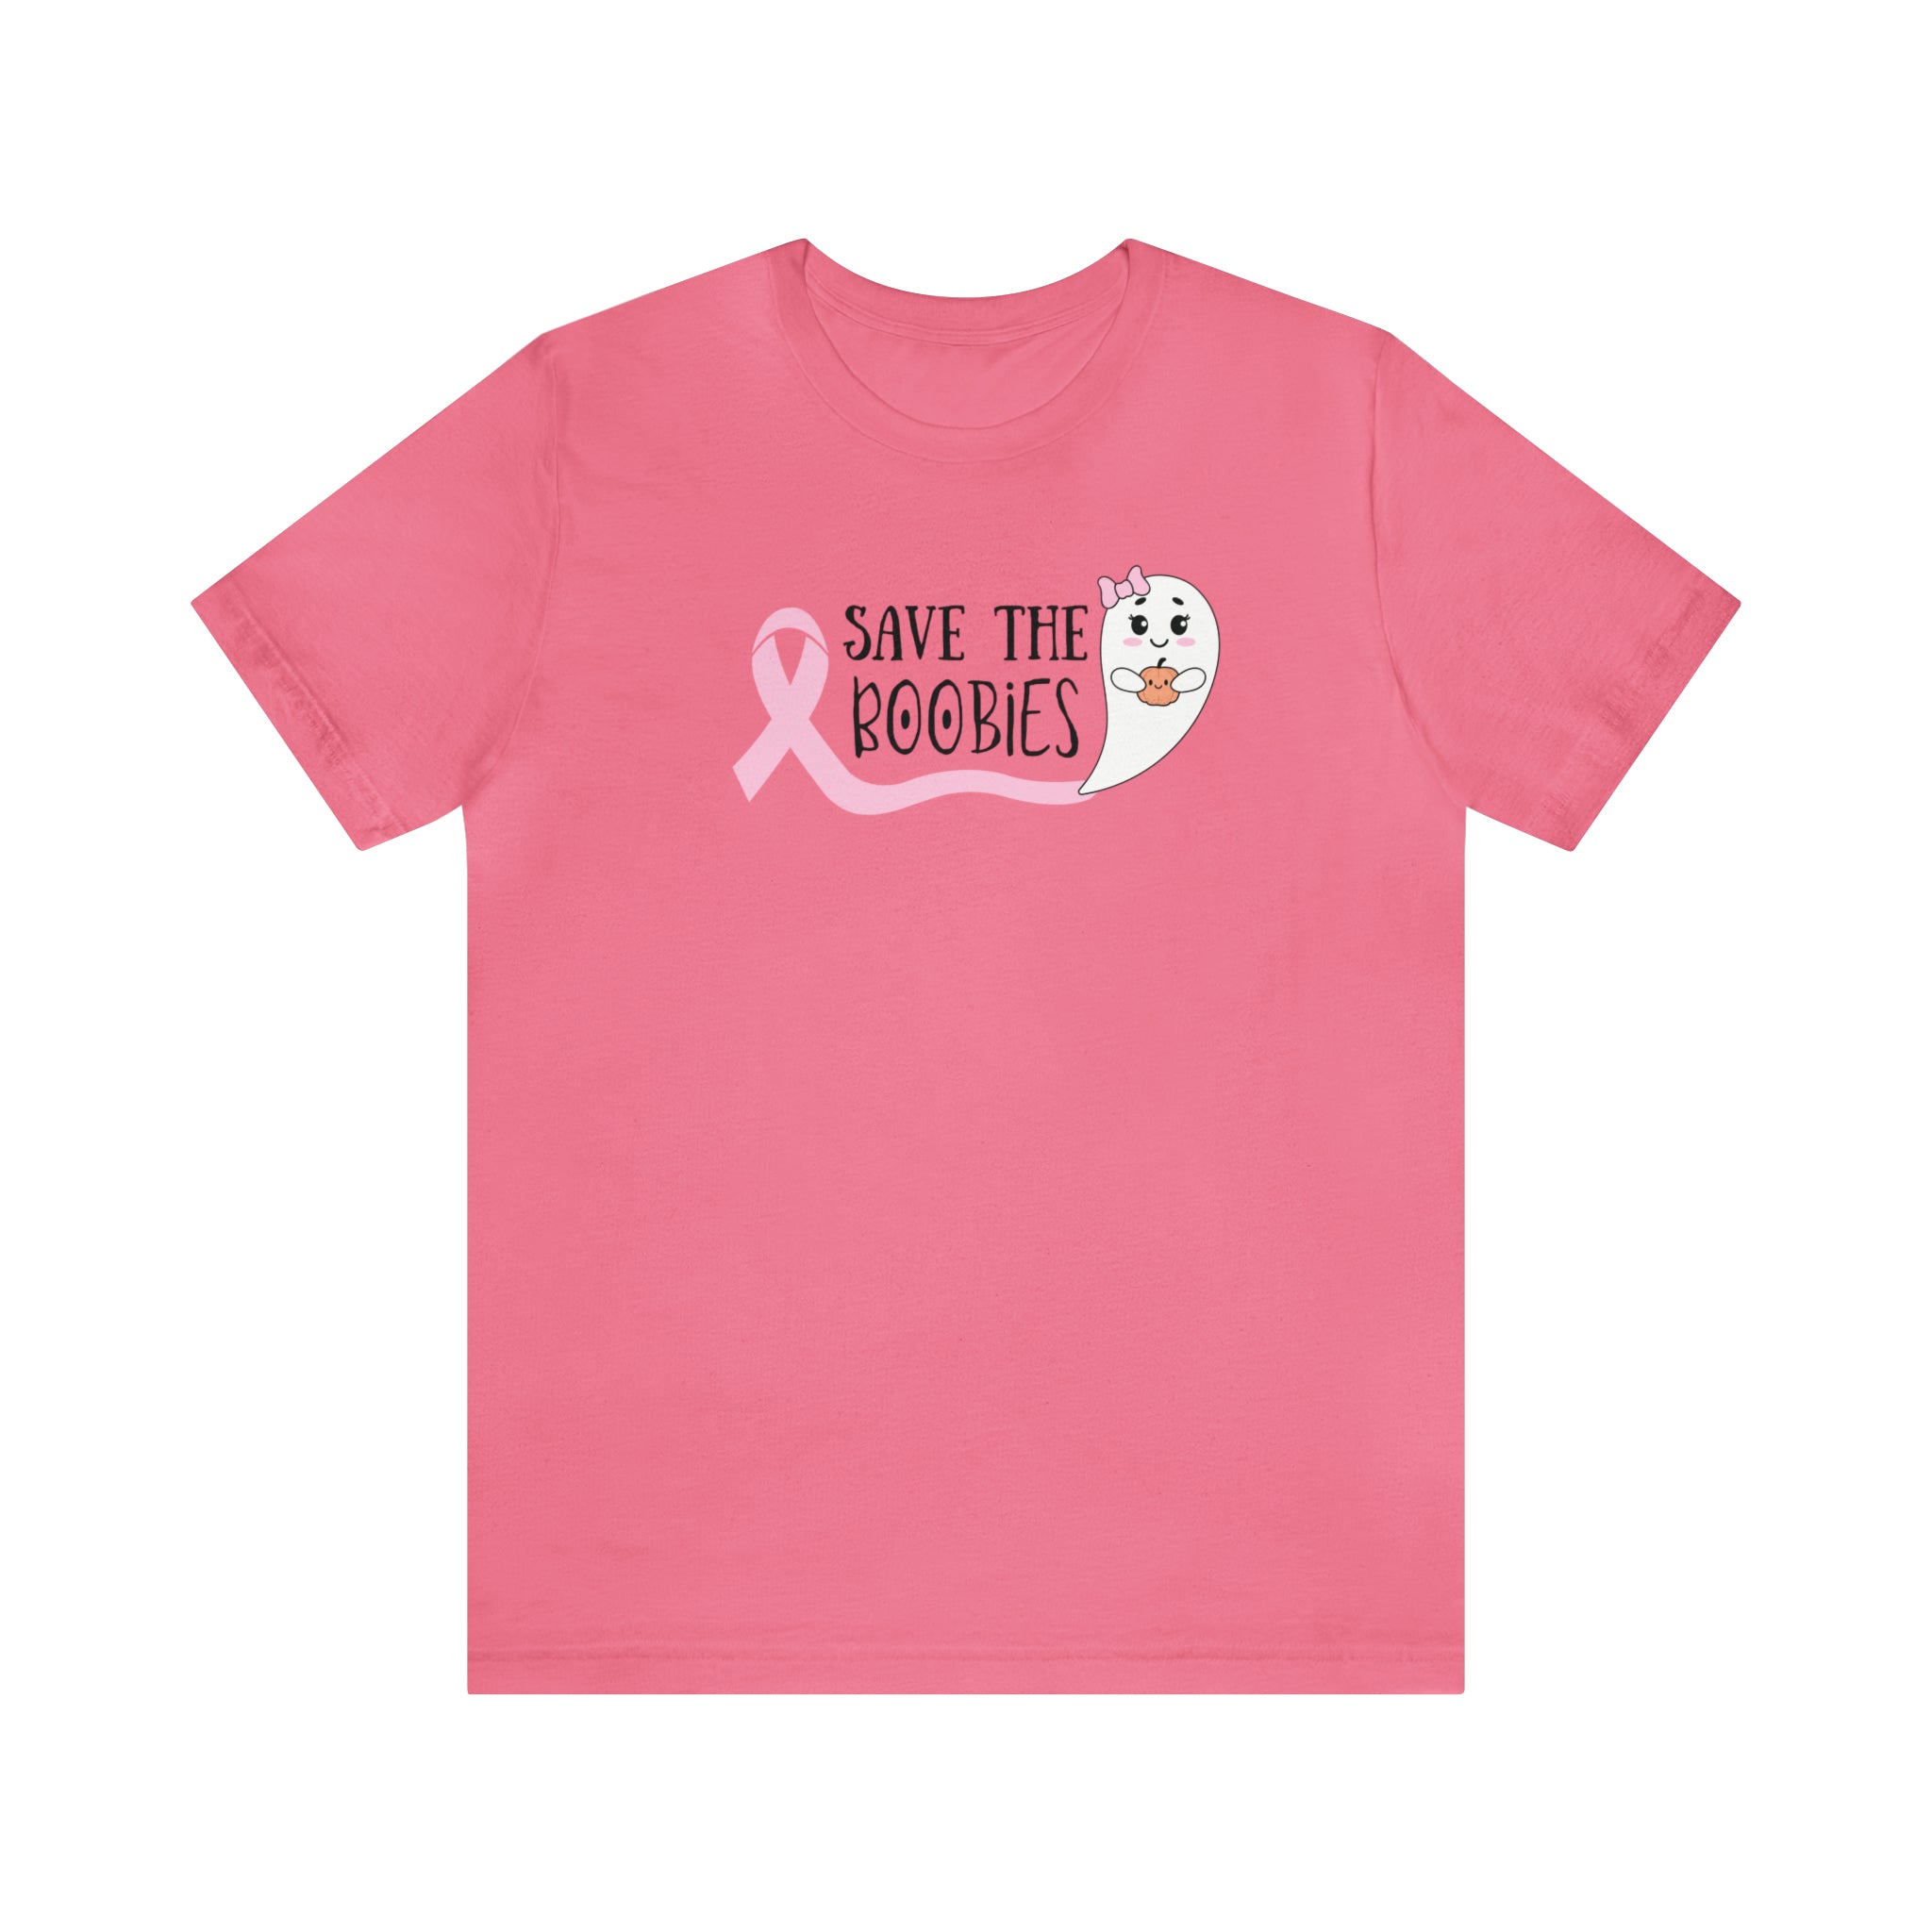 Save the Boo-bies Breast Cancer Awareness Tee